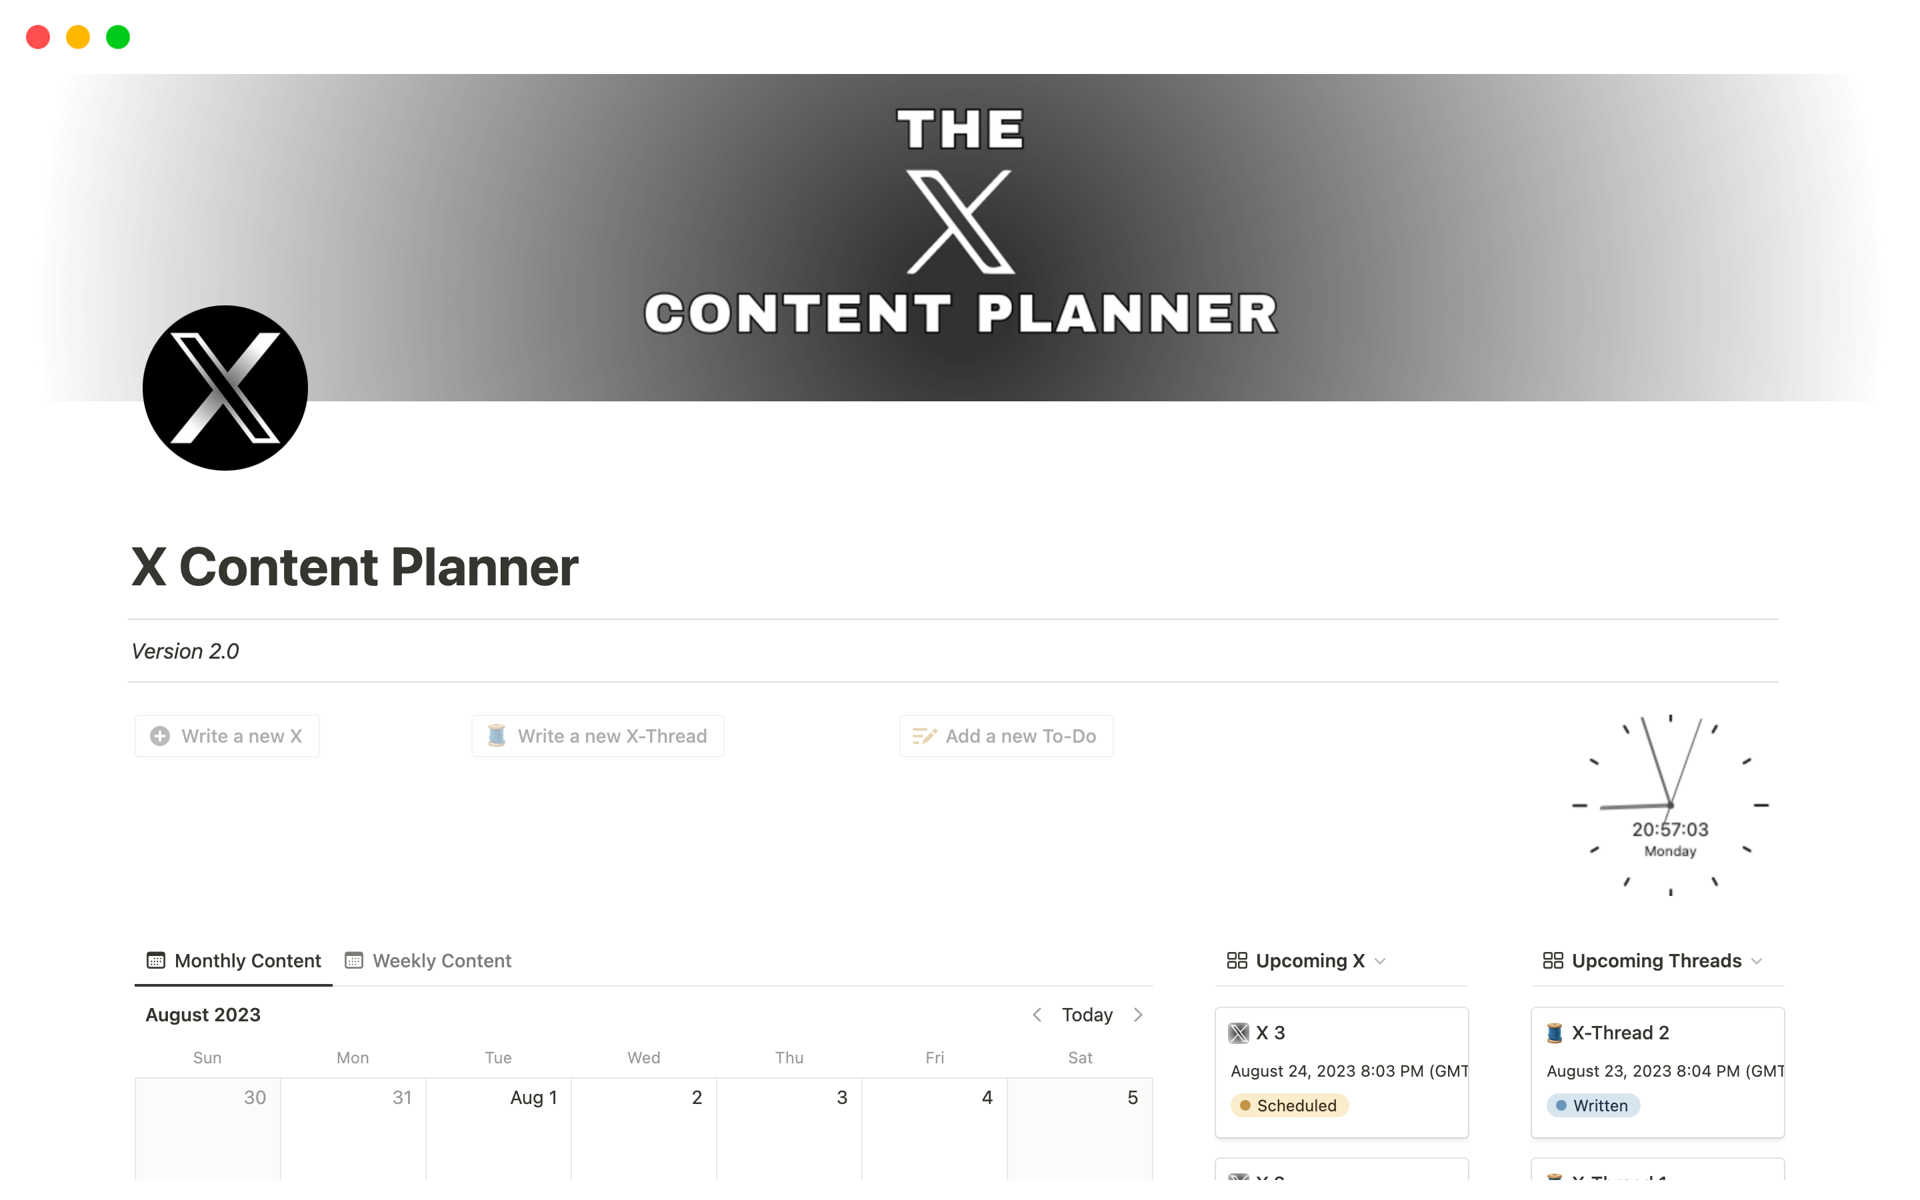 Discover the mysteries of the X with The X Content Planner📅!